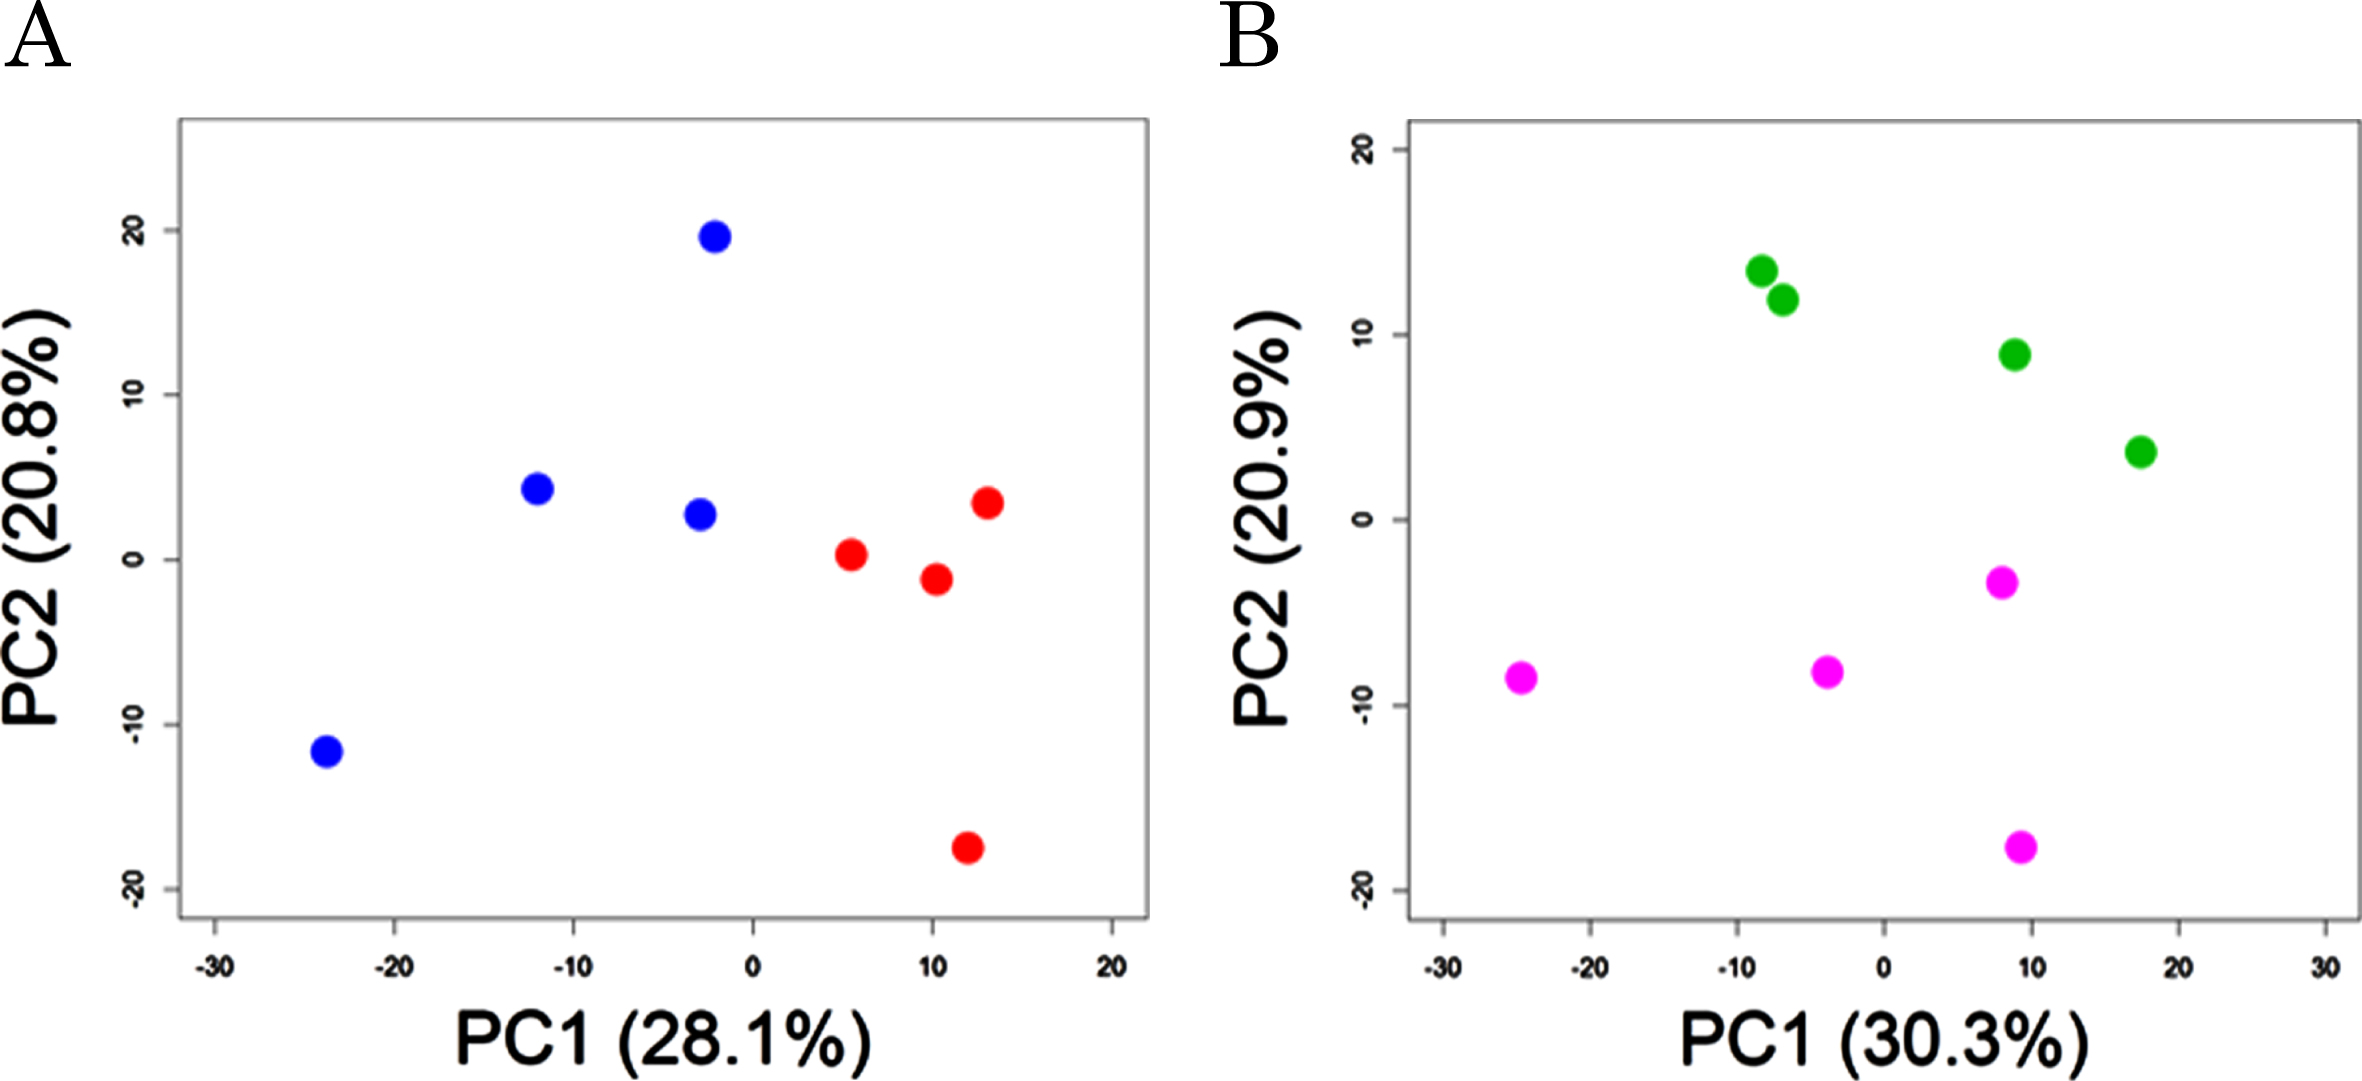 Principal component analysis of plasma metabolites. AD-like model mice (A) and wild-type mice (B) were orally supplemented with B. breve MCC1274 (red or purple circles) or saline (blue or green circles). p values show the comparison of group difference as determined by permutation MANOVA.